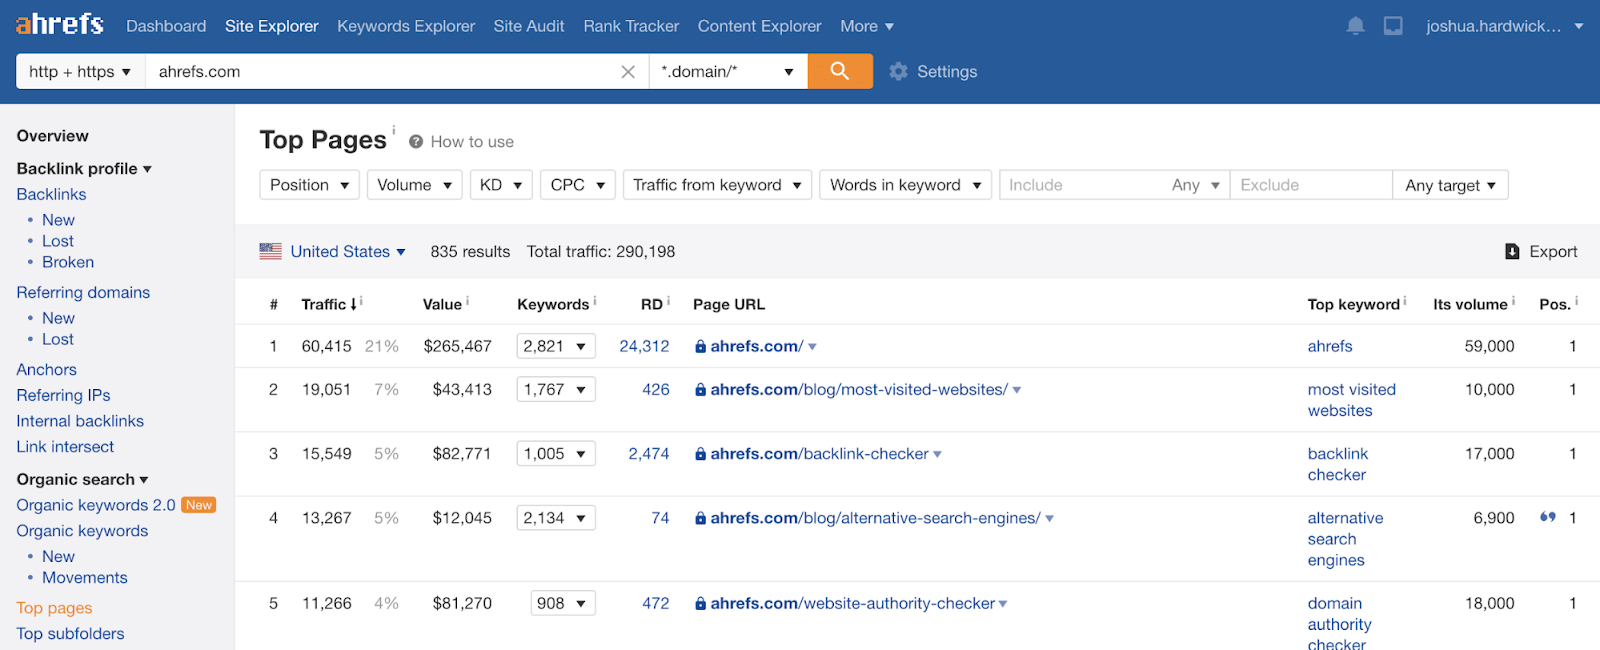 Ahrefs top pages report helps you see what content your enterprise seo team will want to create